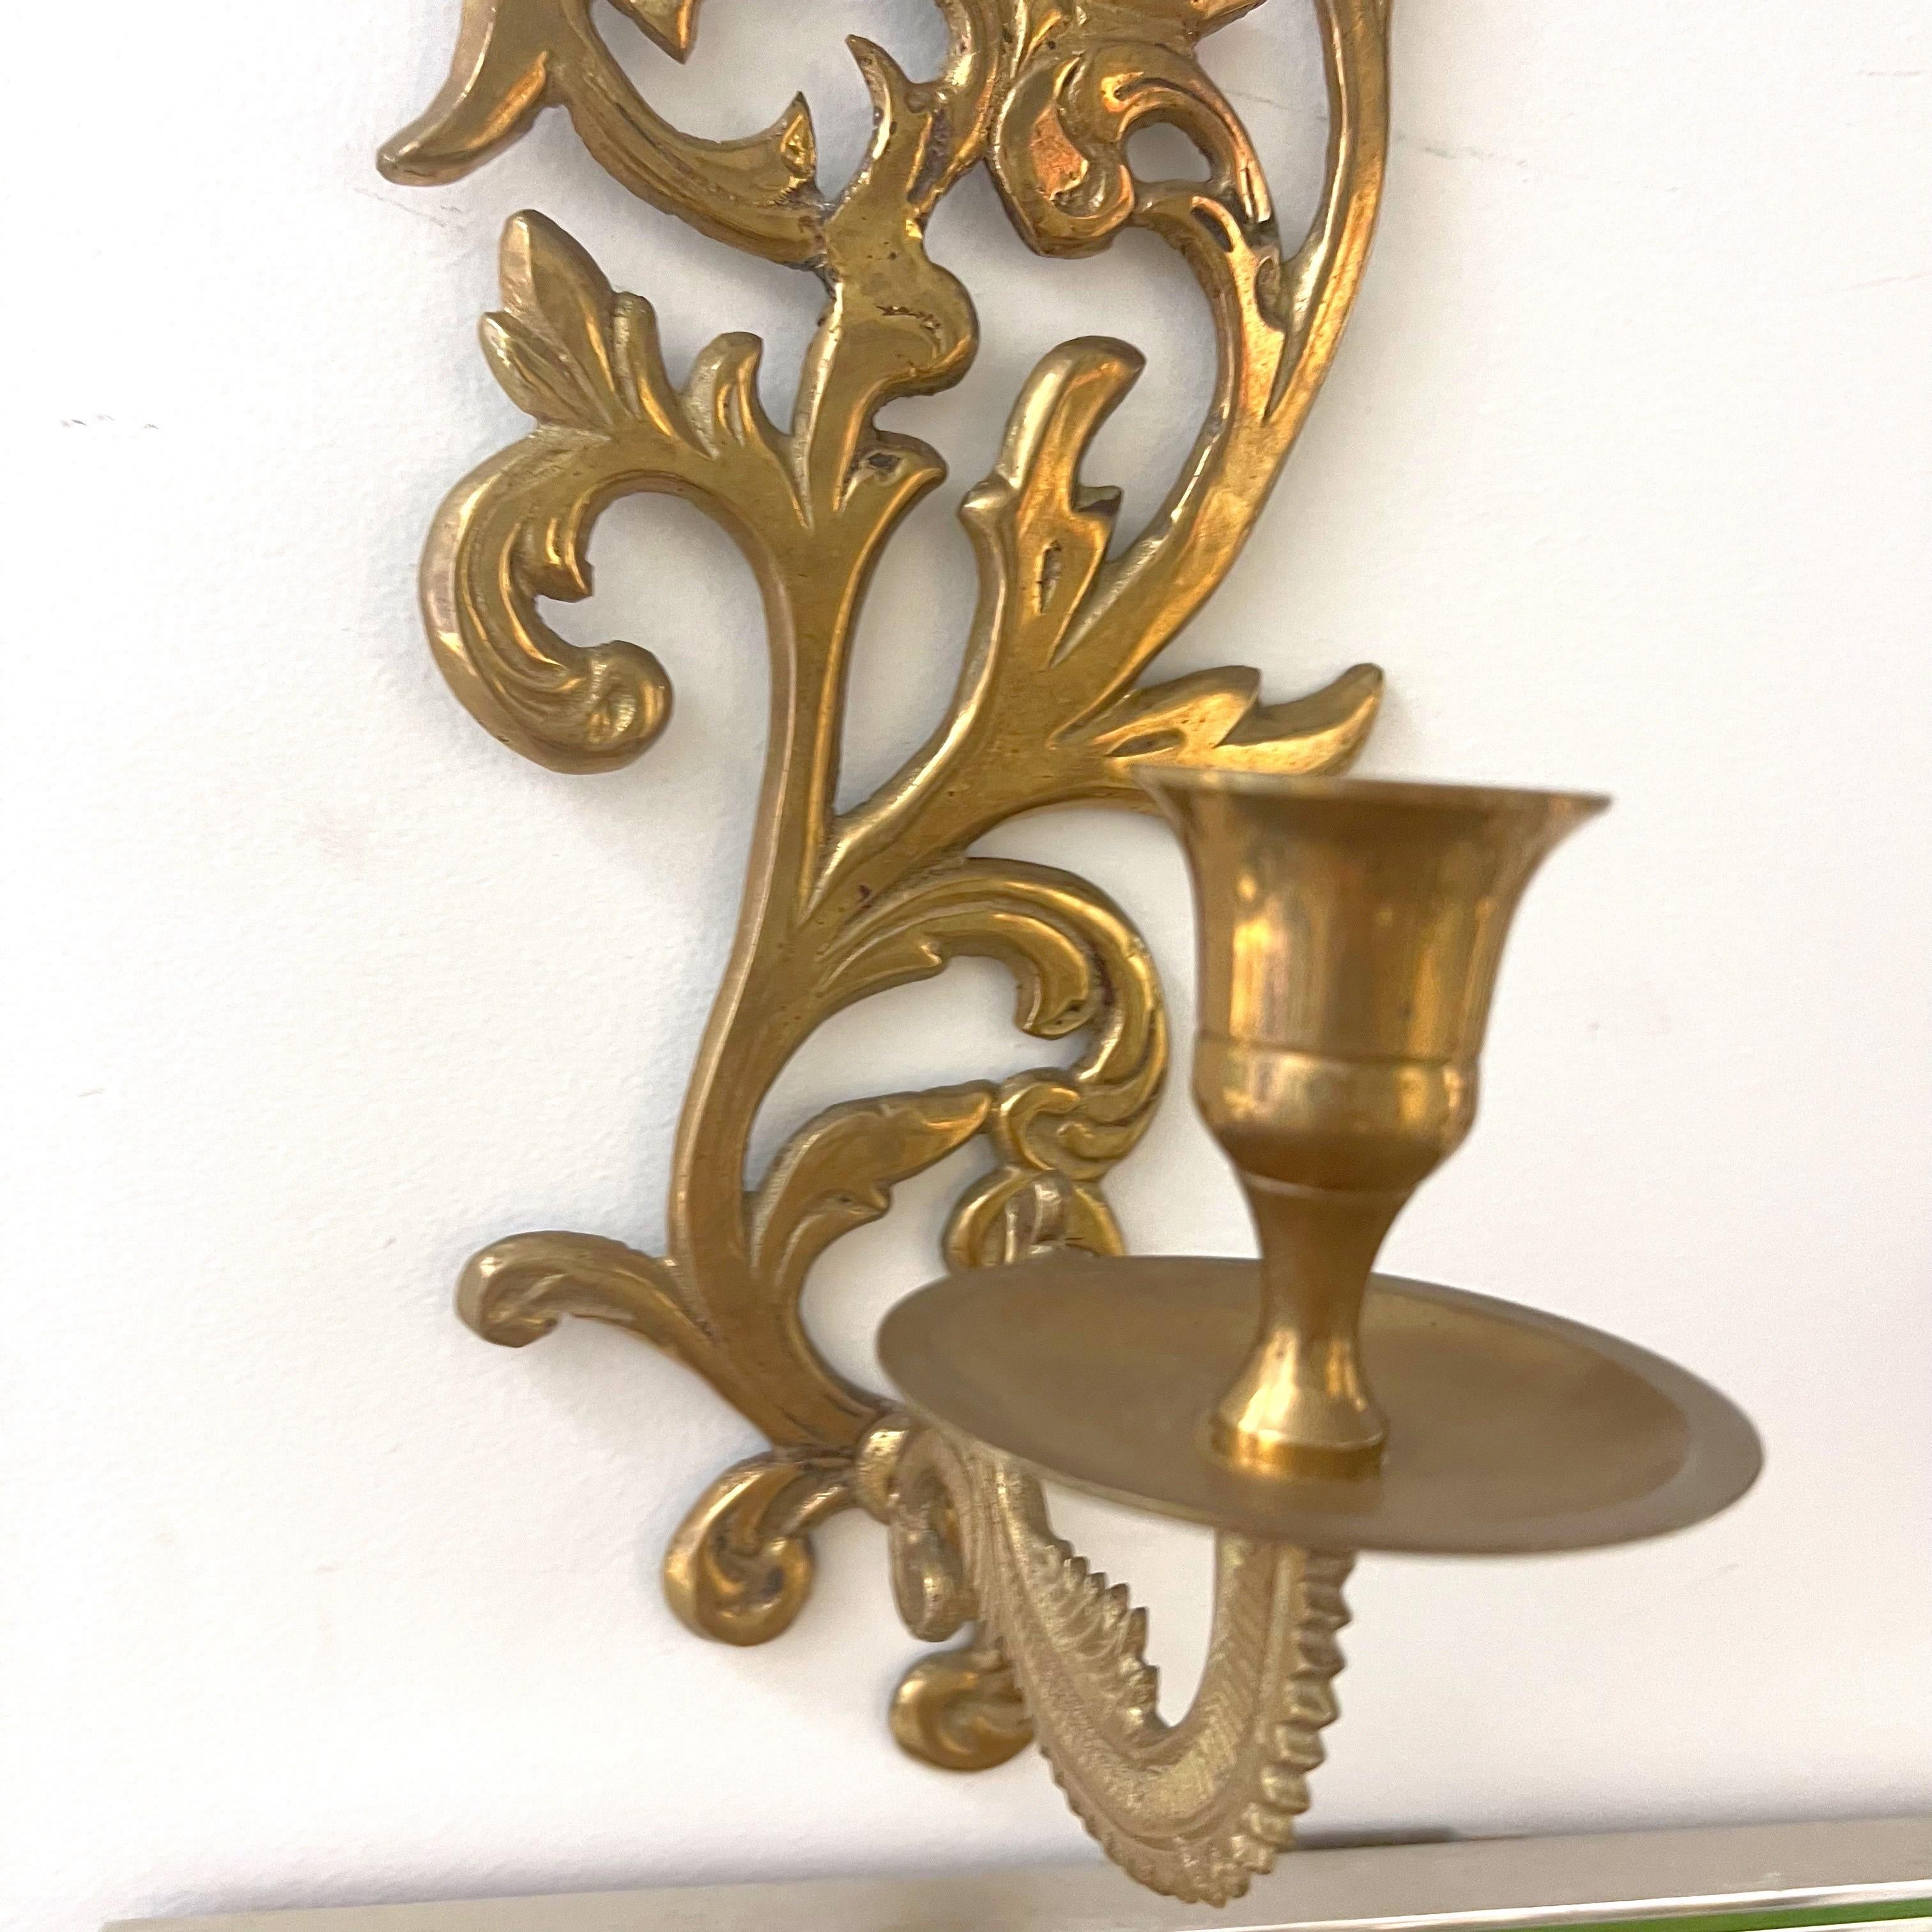 Vintage 1960s Brass Scroll Motif Candlestick Sconces - a Pair
 In Good Condition In Charleston, SC